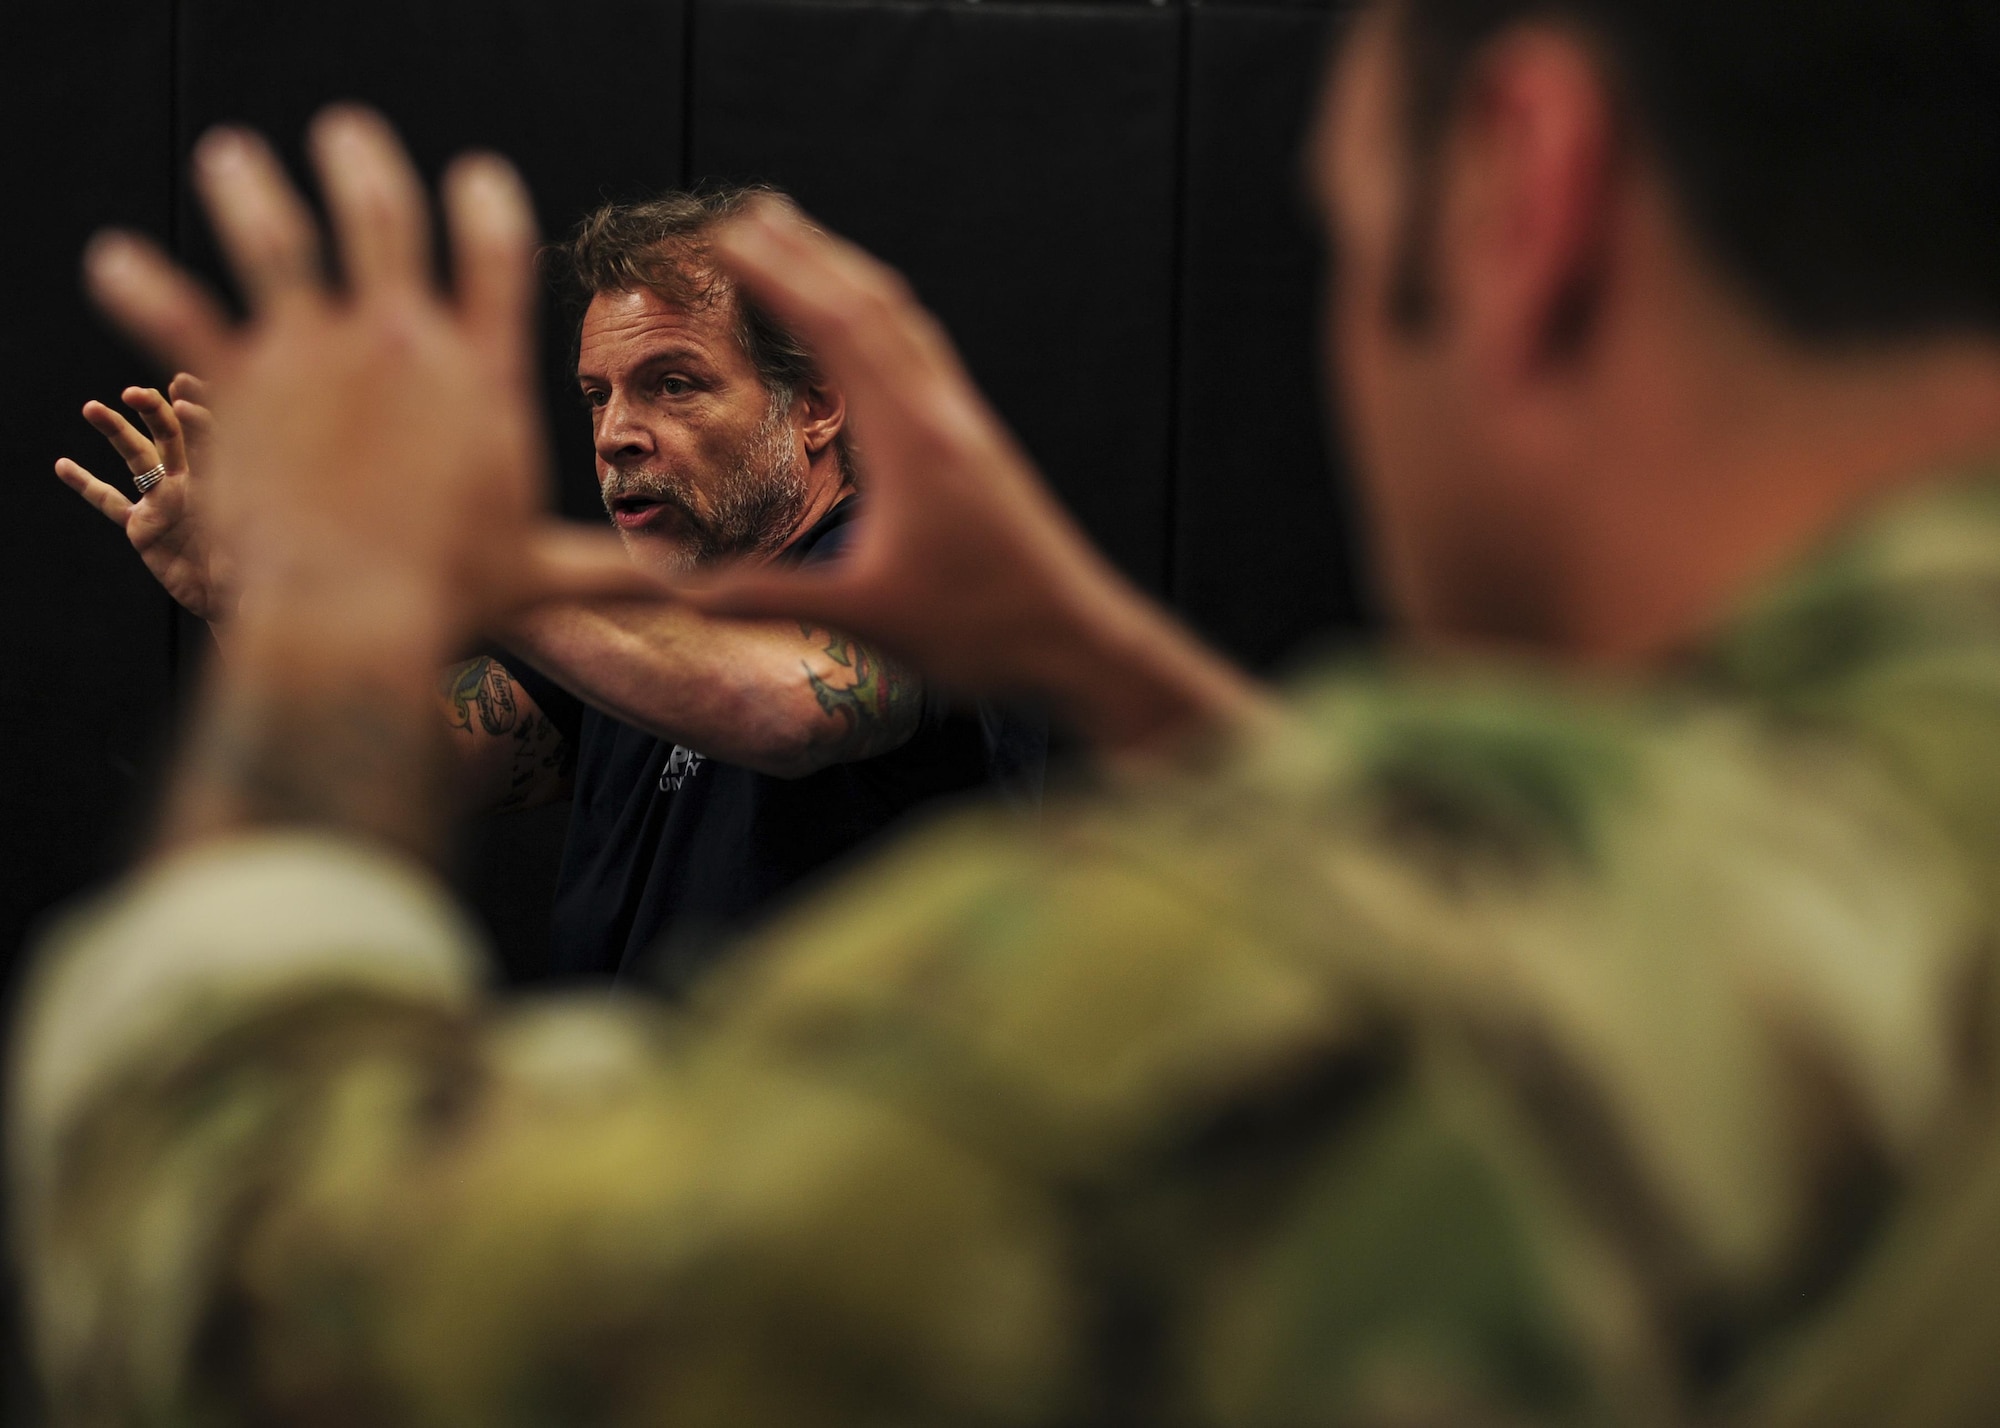 Tony Blauer, founder of Blauer Tactical Systems Inc., instructs Survival, Evasion, Resistance and Escape specialists during a week-long Spontaneous Protection Enabling Accelerated Response System course at Davis-Monthan Air Force Base, Ariz., April 27, 2017. The SPEAR System takes advantage of the human body’s startle/flinch mechanism to convert an aggressor’s attack into a tactical counter. (U.S. Air Force photo by Senior Airman Chris Drzazgowski)